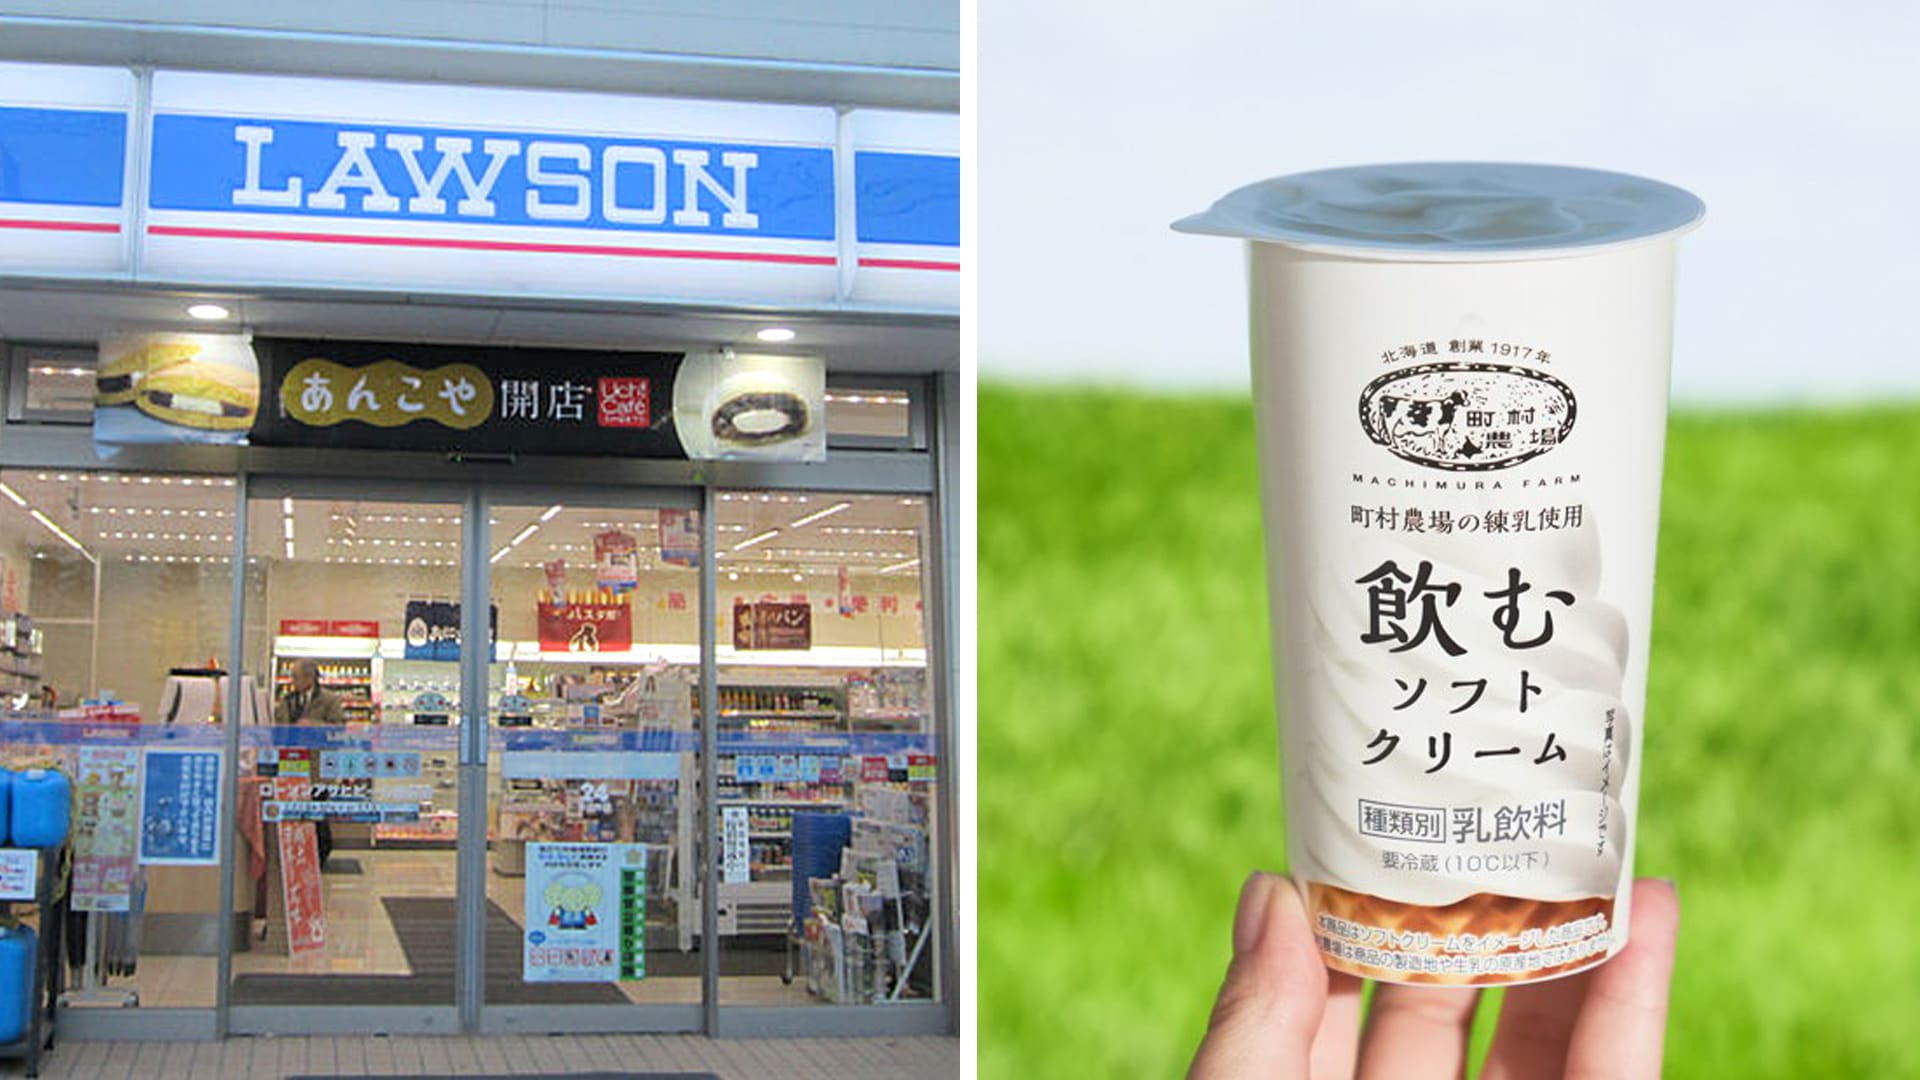 Going To Japan? Try This Drinkable Soft-Serve Ice Cream From Lawson